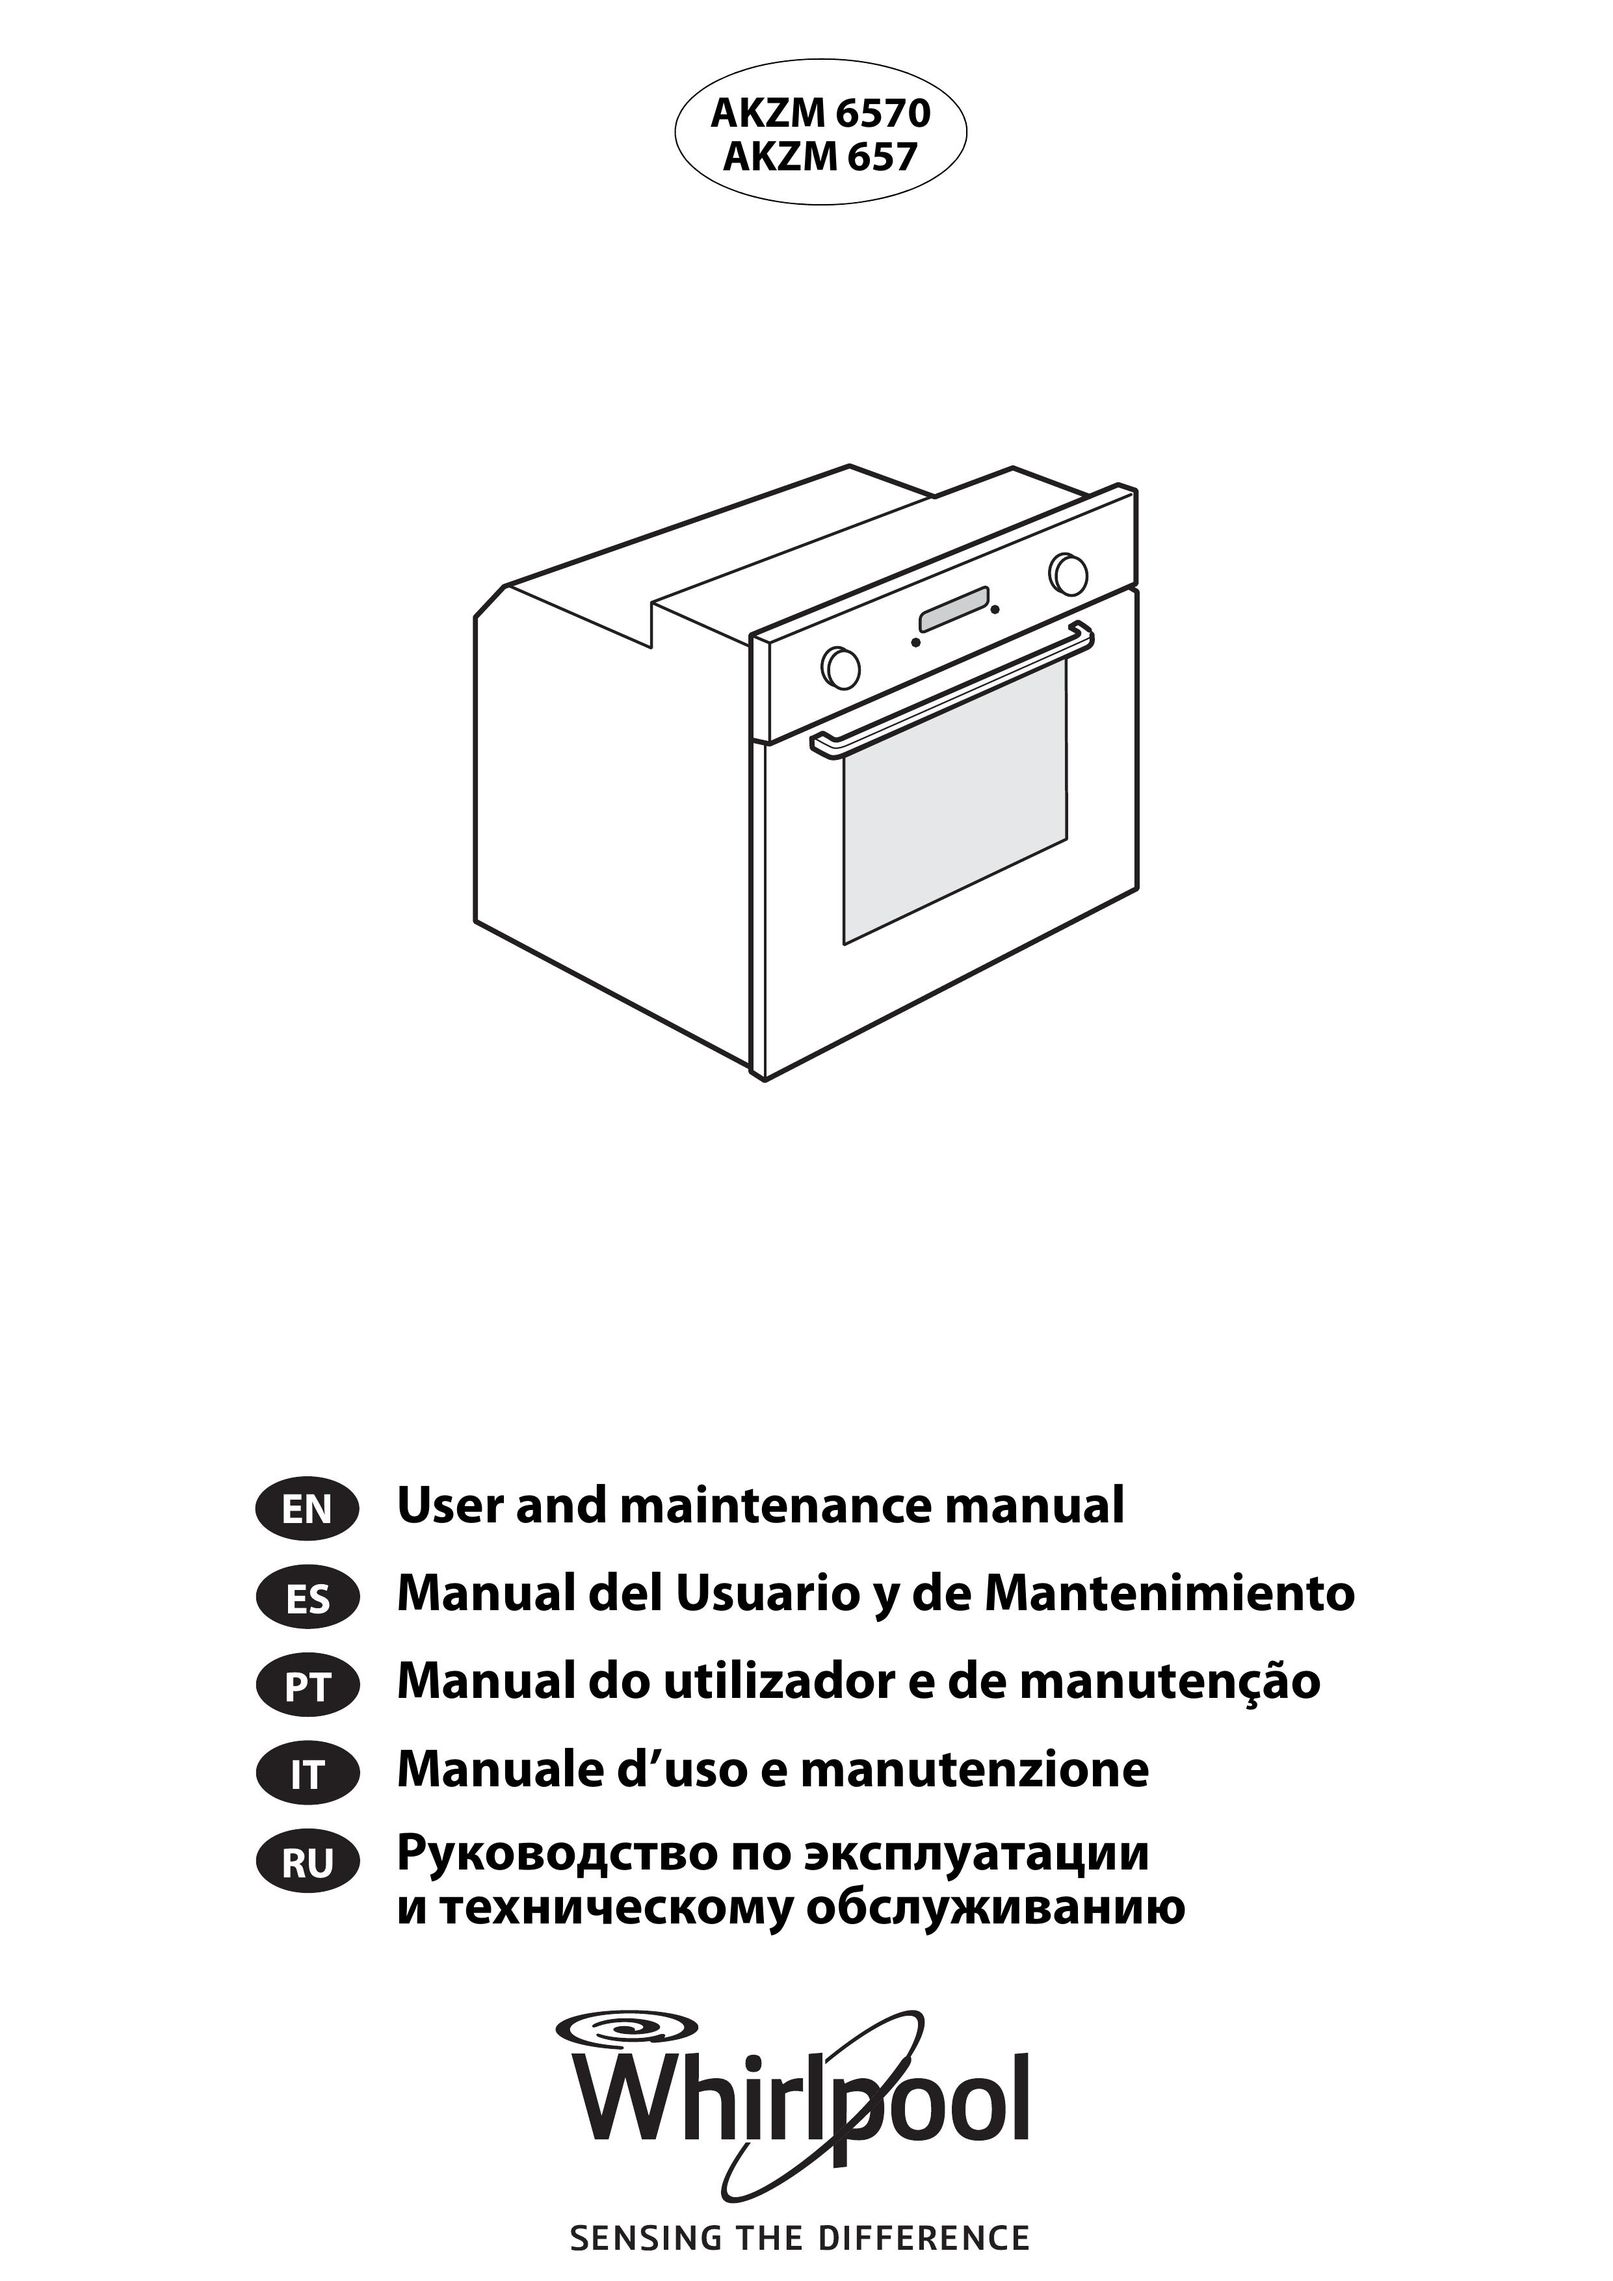 Whirlpool AKZM 6570 Double Oven User Manual